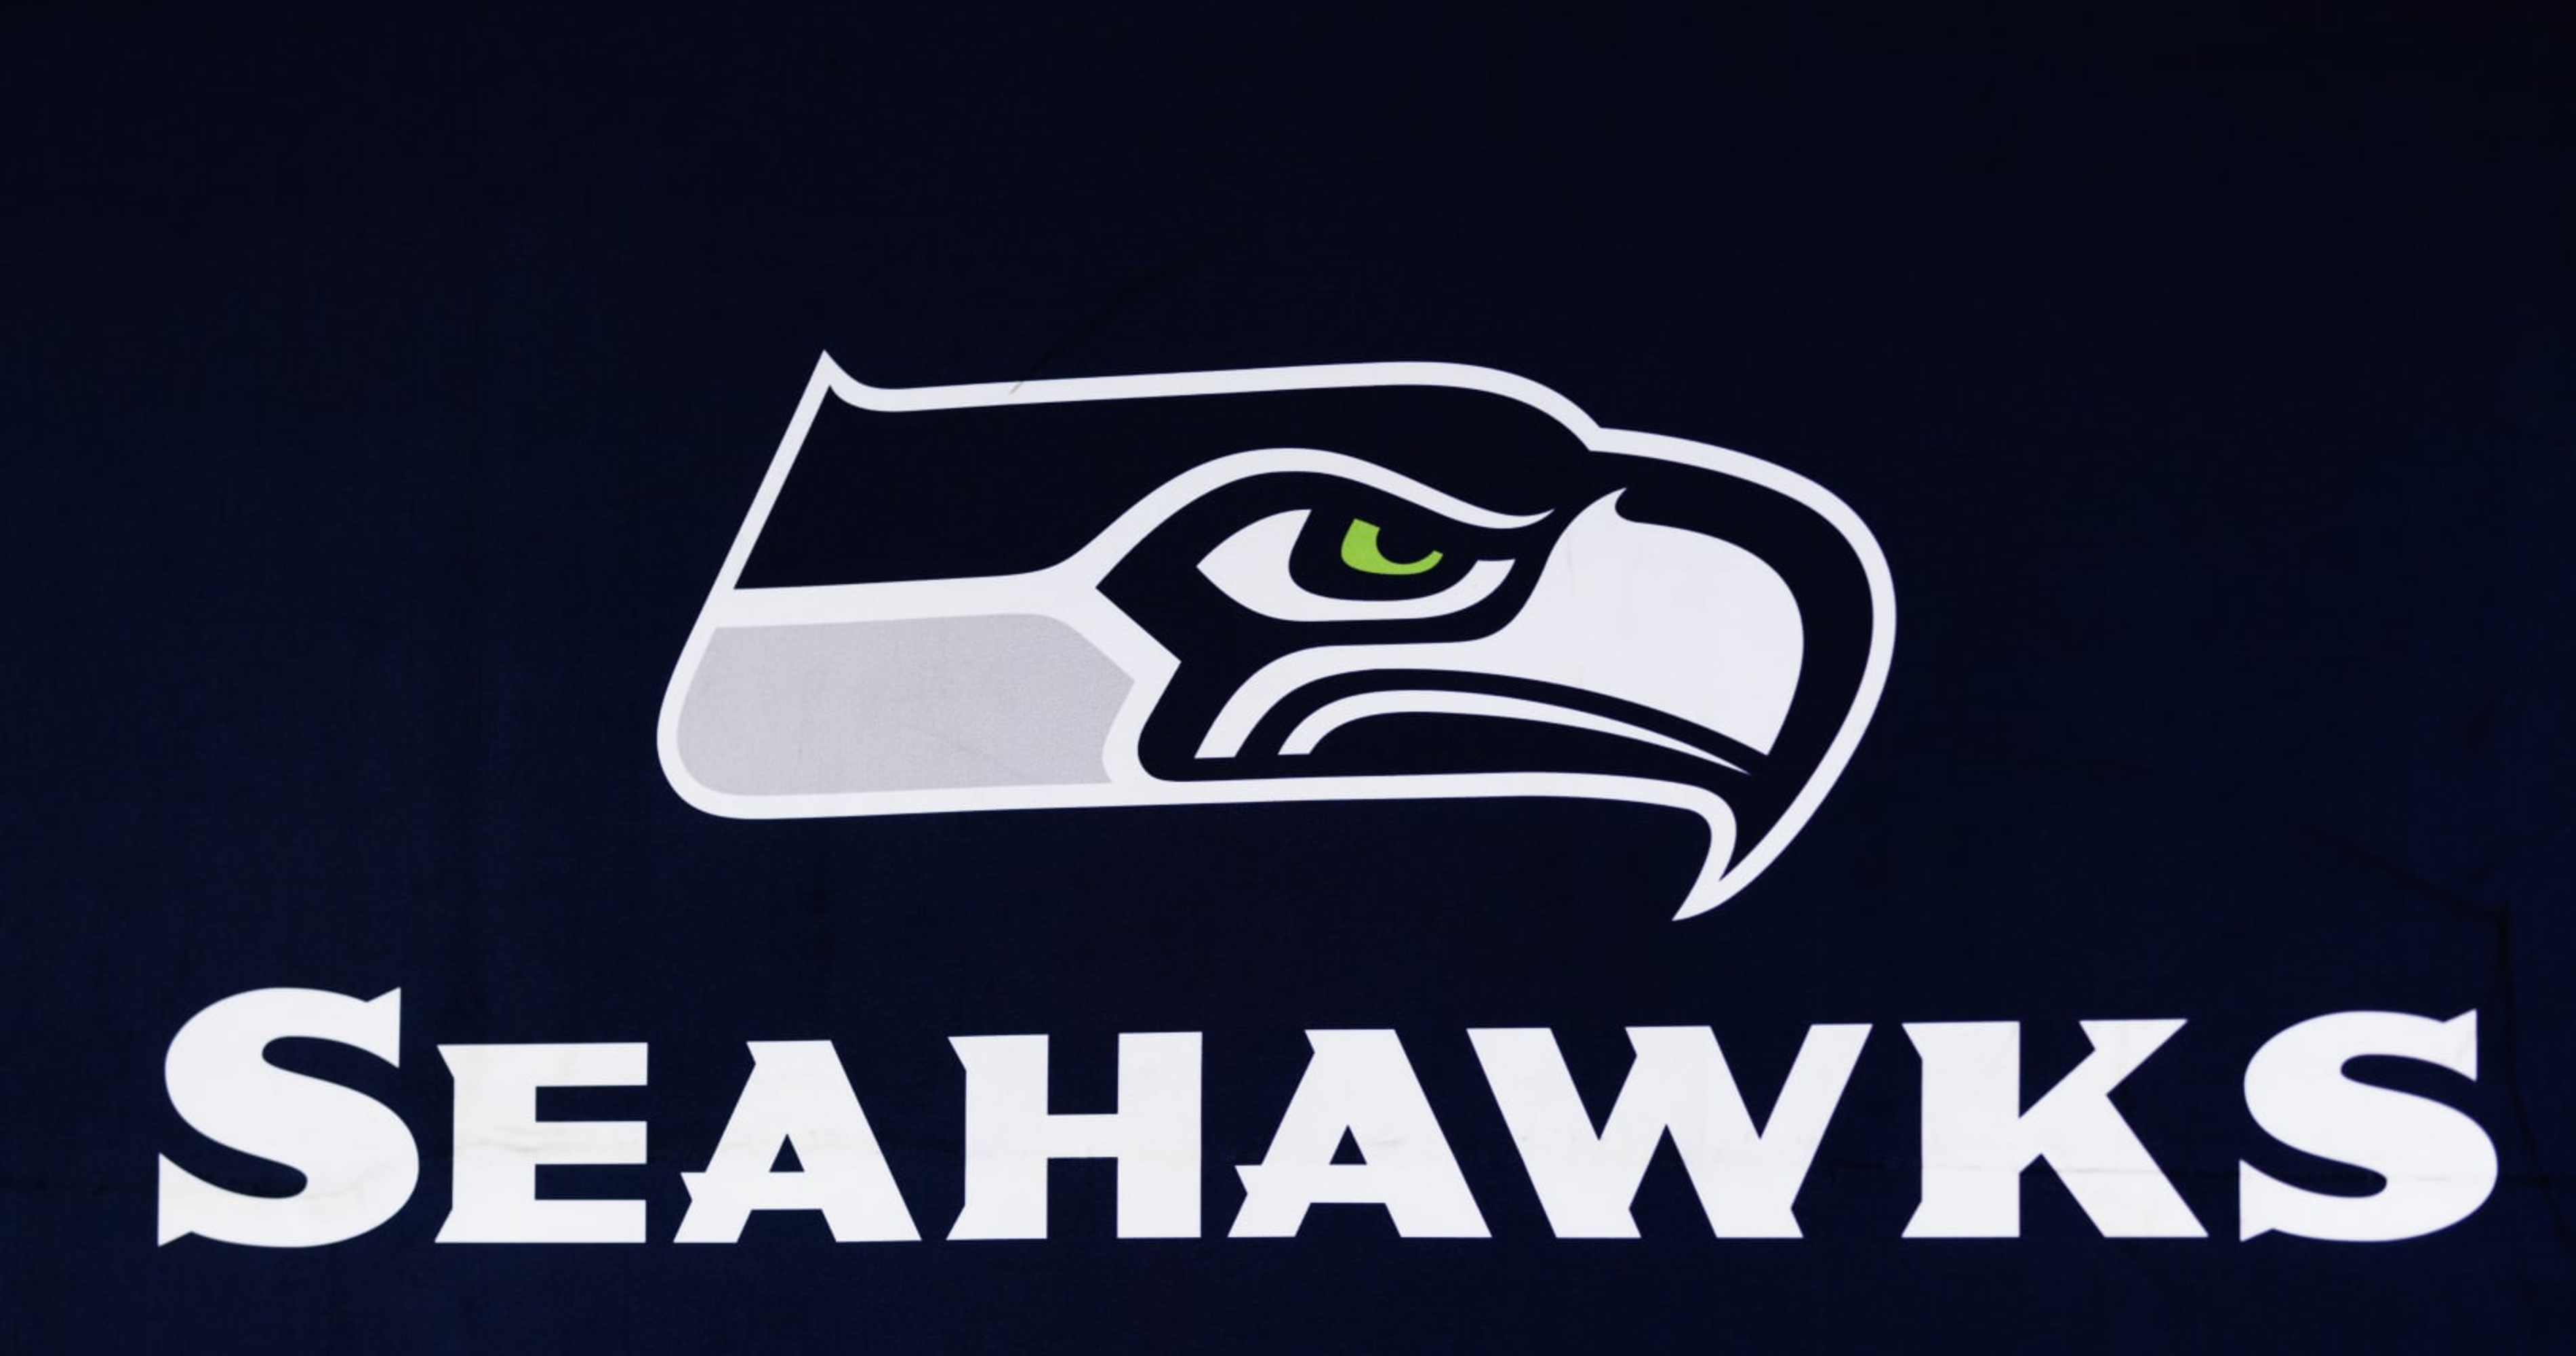 Got excited for our throwback jerseys, so I decided to make some retro  phone wallpapers : r/Seahawks